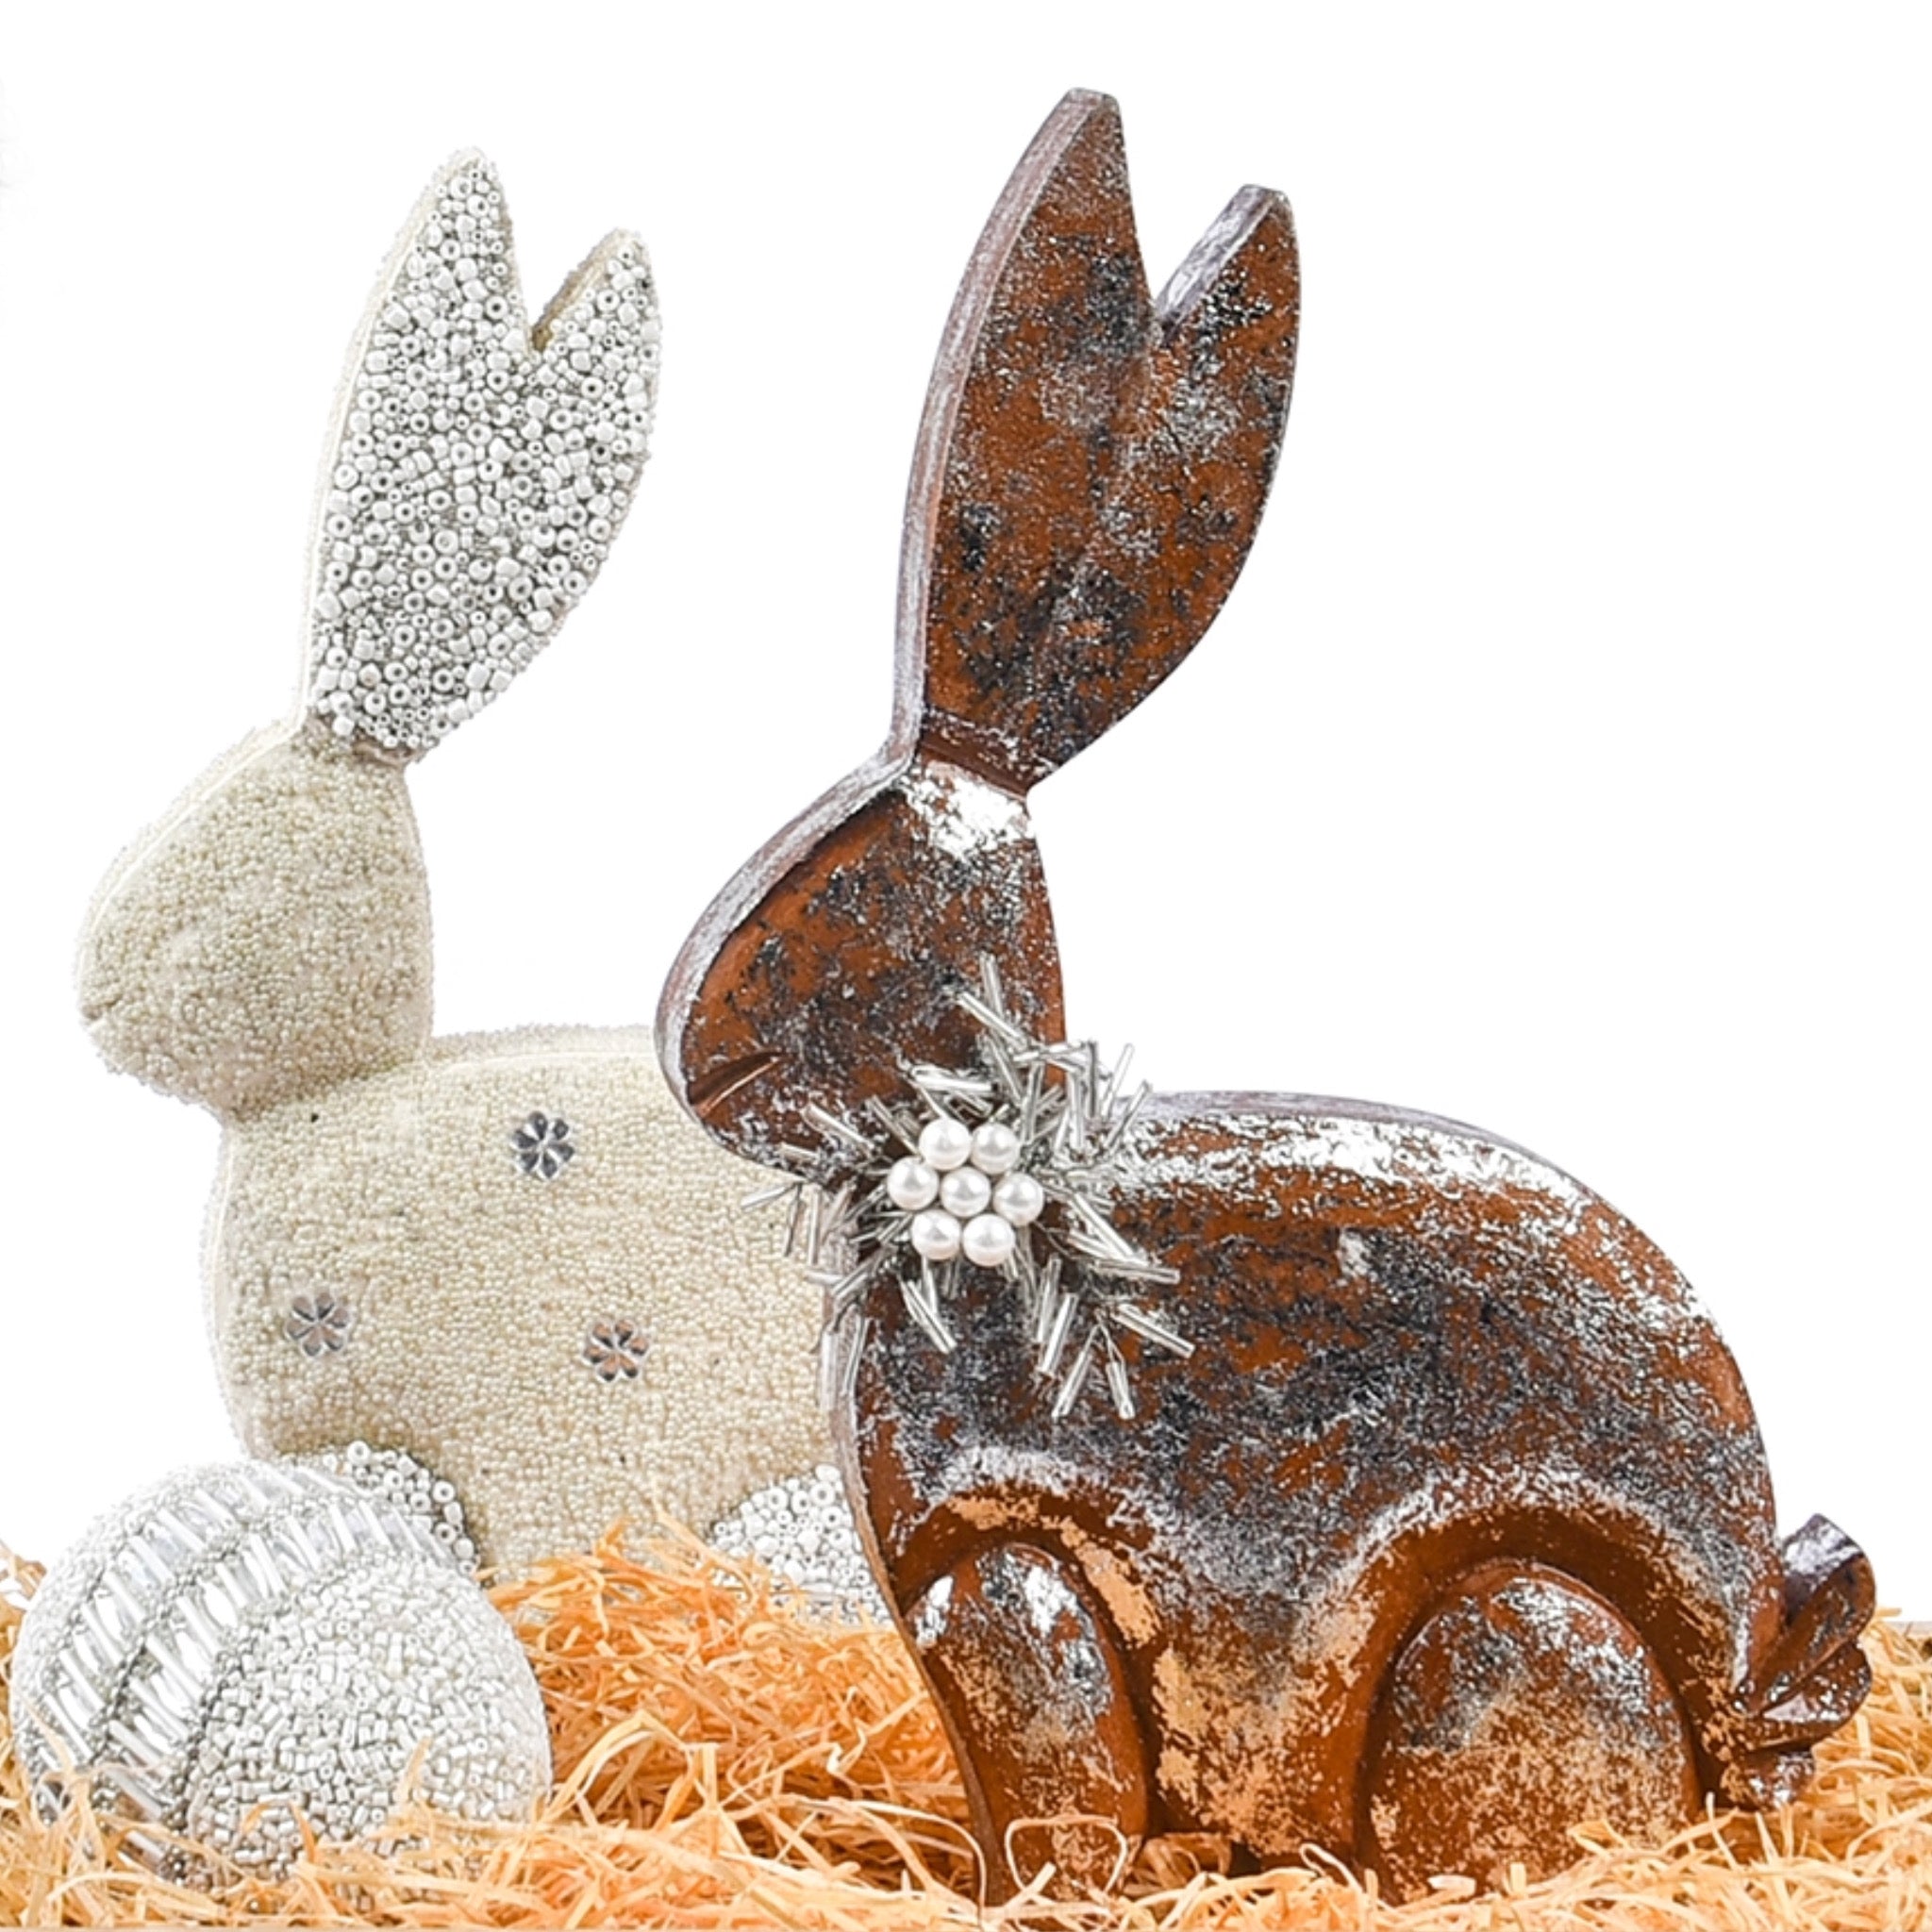 No Bunny Like You in Natural, Silver